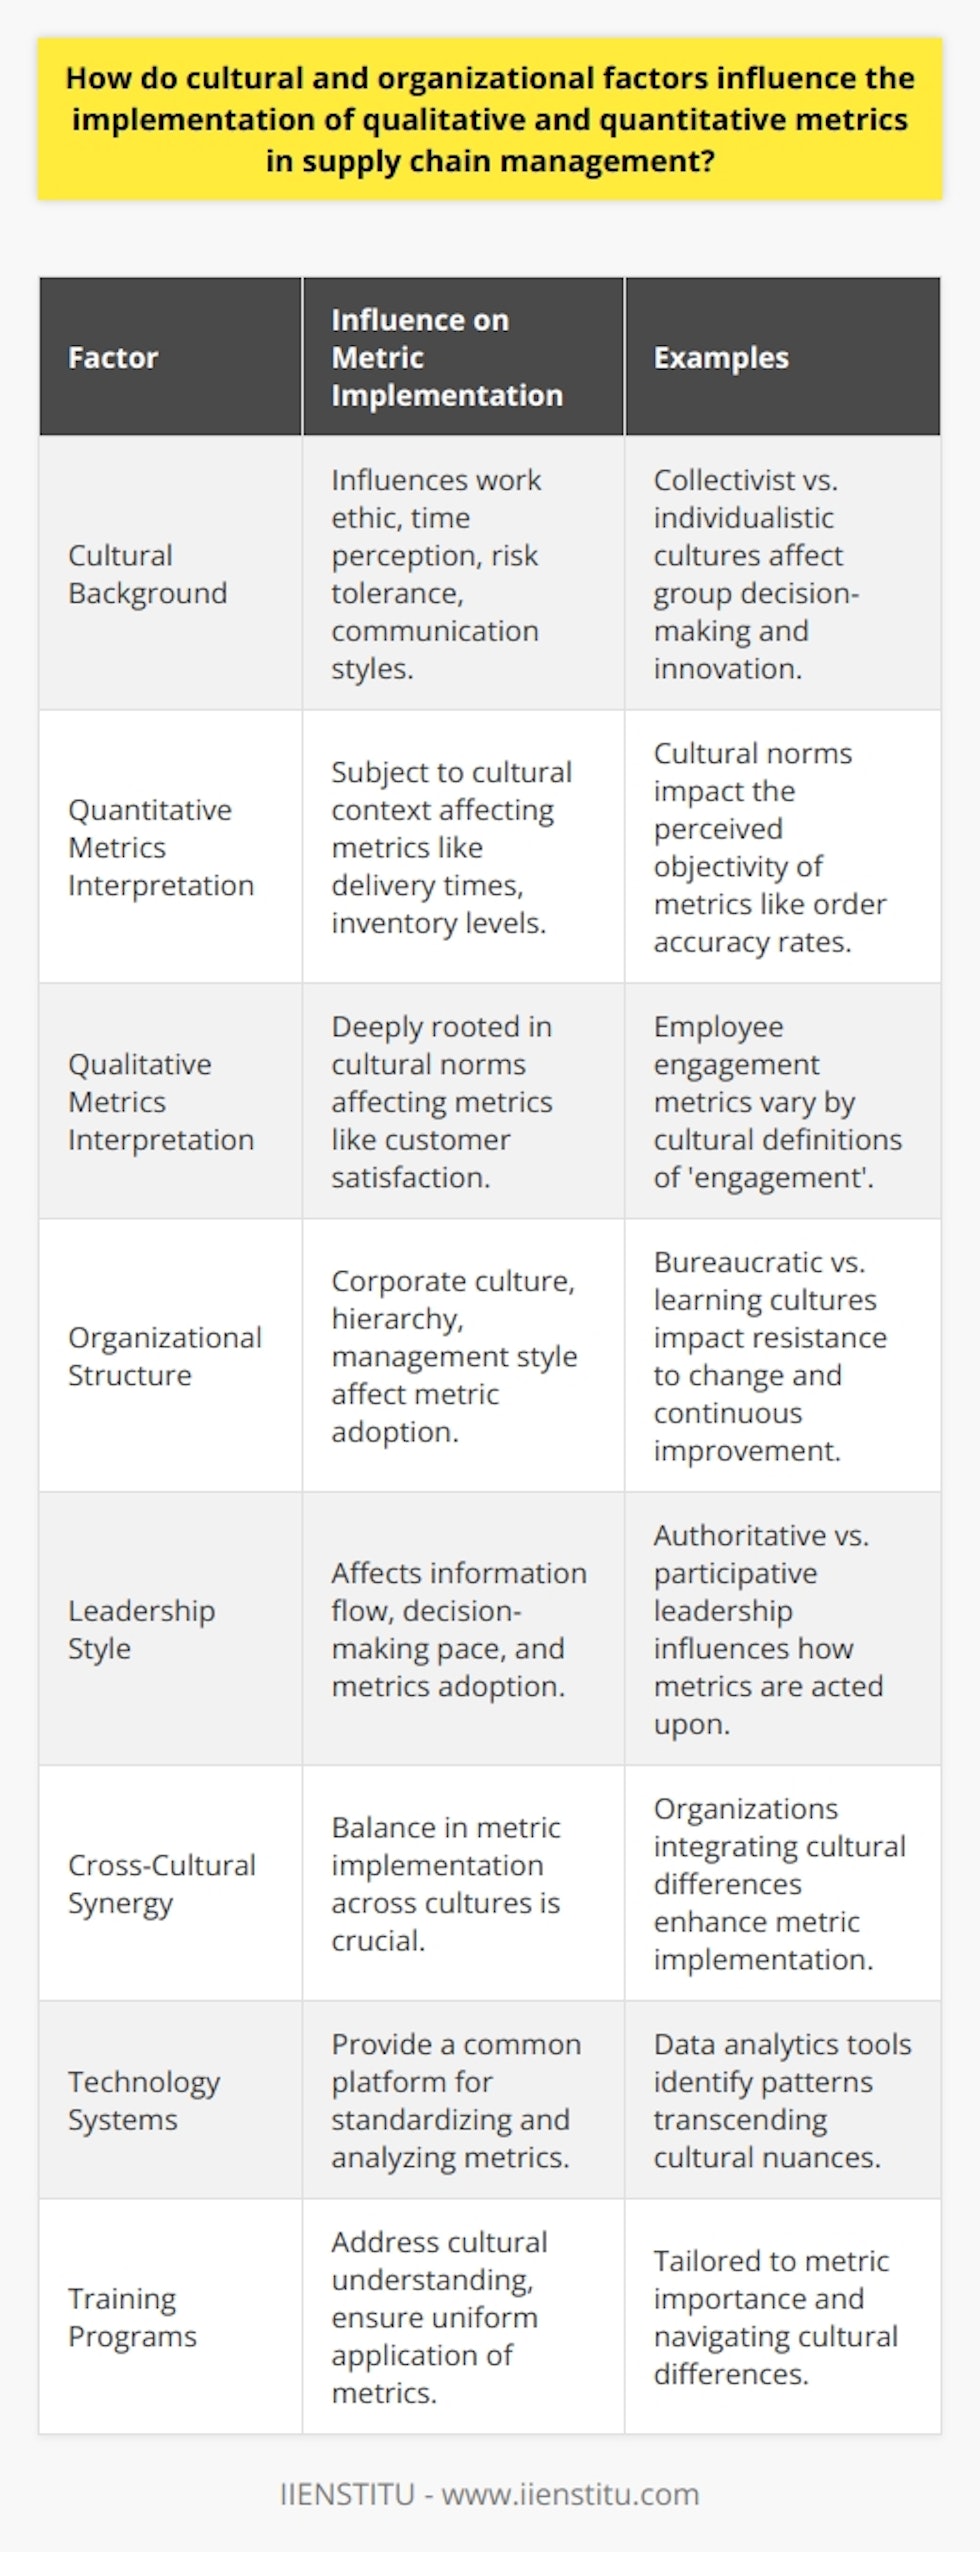 In supply chain management, the incorporation and effectiveness of qualitative and quantitative metrics are shaped by cultural and organizational dynamics. Both elements influence the efficiency and accuracy of measuring supply chain performance, impacting decision-making, strategy formulation, and ultimately, the competitiveness of an organization.**Cultural Influences on Metric Implementation**Culture embeds itself deeply in how supply chain metrics are adopted and interpreted, particularly when working with international teams. Diverse cultural backgrounds mean different approaches to work ethic, time perception, risk tolerance, and communication styles.For instance, collectivist cultures may prioritize group harmony and consensus over individual achievement, which can affect the speed and manner in which decisions are reached based on the data these metrics provide. On the other hand, individualistic cultures might encourage innovation and the embrace of new metrics more quickly but could struggle with adopting changes that require group cohesion and wide-scale cooperation.Quantitative metrics, such as delivery lead times, inventory levels, and order accuracy rates, while seemingly objective, are subject to interpretation based on cultural contexts. Qualitative metrics, which might include customer satisfaction or employee engagement, are even more deeply rooted in cultural norms and values, influencing the perception of what constitutes 'satisfaction' or 'engagement'.**Organizational Impact on Metric Implementation**Within an organization, the corporate culture, hierarchy, communication channels, and the overall management style play a pivotal role in how metrics are implemented. An organization with a strong learning culture, for example, is more likely to implement metrics that drive continuous improvement and foster innovation.In contrast, an organization that operates in a highly bureaucratic environment might struggle with the adoption of agile supply chain metrics due to the resistance to change or slow decision-making processes. C-suite executives and top management are key influencers here. Their leadership style, whether it's more authoritative or participative, will affect how freely information flows through the organization and how quickly metrics are adopted and acted upon.**Synergy between Cultural and Organizational Dynamics**A supply chain that operates across multiple cultures requires a careful balance in metric implementation. An organization that recognizes and respects cultural differences and effectively integrates them into its operations is more likely to overcome potential barriers to metric implementation.For example, IIENSTITU, with its commitment to providing educational services that bridge gaps between different cultures, would likely emphasize continuous training and cross-cultural understanding to enhance the integration of diverse metric interpretations.**The Role of Technology and Training**Effective technology systems can provide a common platform where different cultural interpretations of metrics can be standardized, analyzed, and communicated efficiently. Data analytics tools can help to identify patterns and trends that transcend cultural nuances by providing a factual basis for supply chain operations.Training programs tailored to address cultural diversity can complement technology in ensuring that metrics are uniformly understood and applied. These programs can be designed to focus on both the importance of metric implementation and the soft skills needed to navigate cultural differences, thereby improving the overall effectiveness of supply chain management.**Conclusion**Cultural and organizational factors exert considerable influence on the application and efficacy of qualitative and quantitative metrics in supply chain management. Awareness and proper management of these factors can facilitate superior metric implementation, driving supply chain success. Businesses must, therefore, foster an understanding and inclusive environment where technology and training synergize with these factors to optimize supply chain operations.